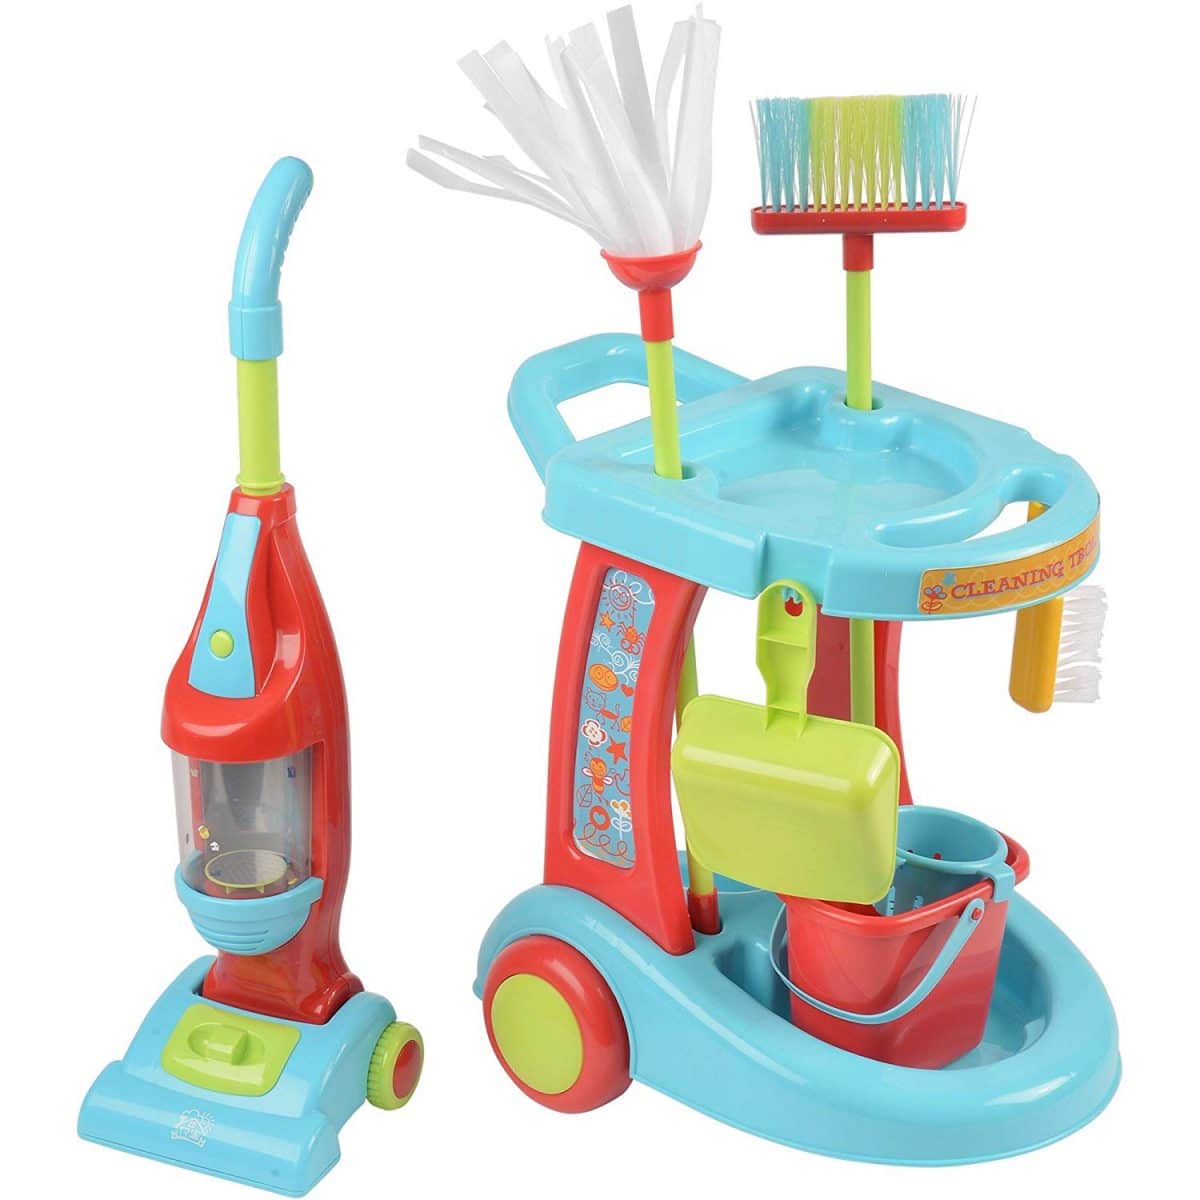 children's henry cleaning trolley